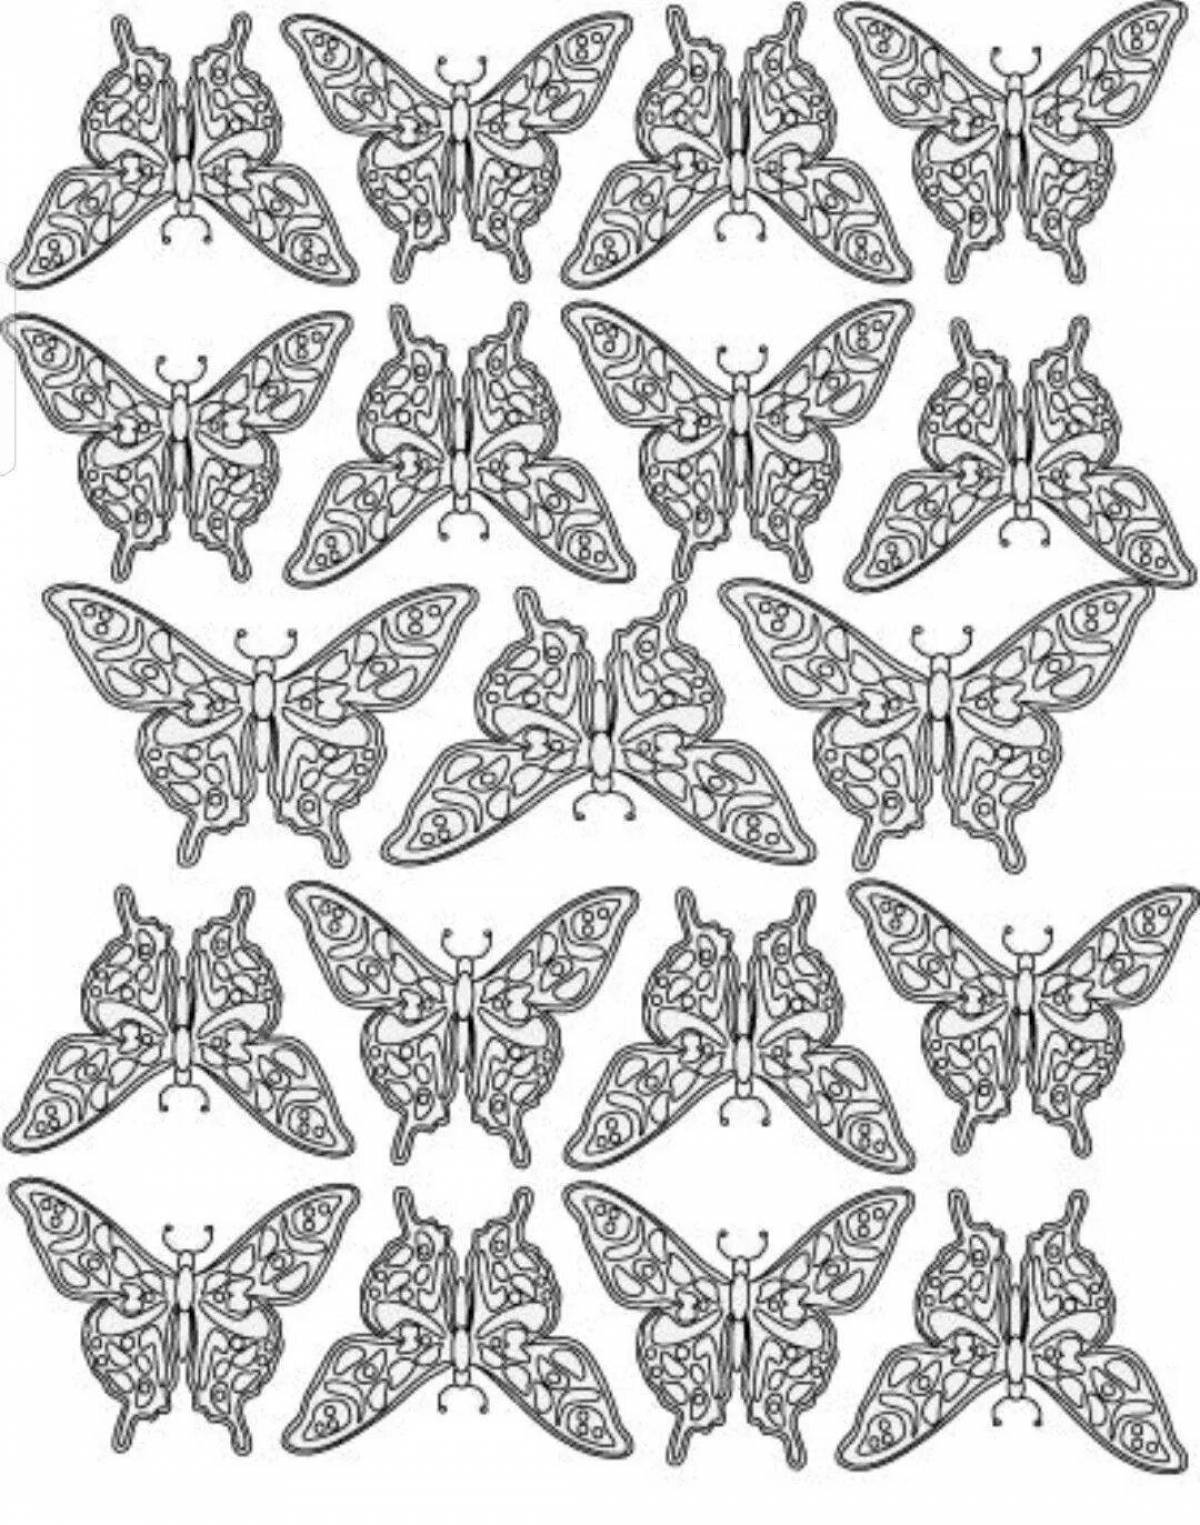 Amazing coloring pages of butterflies